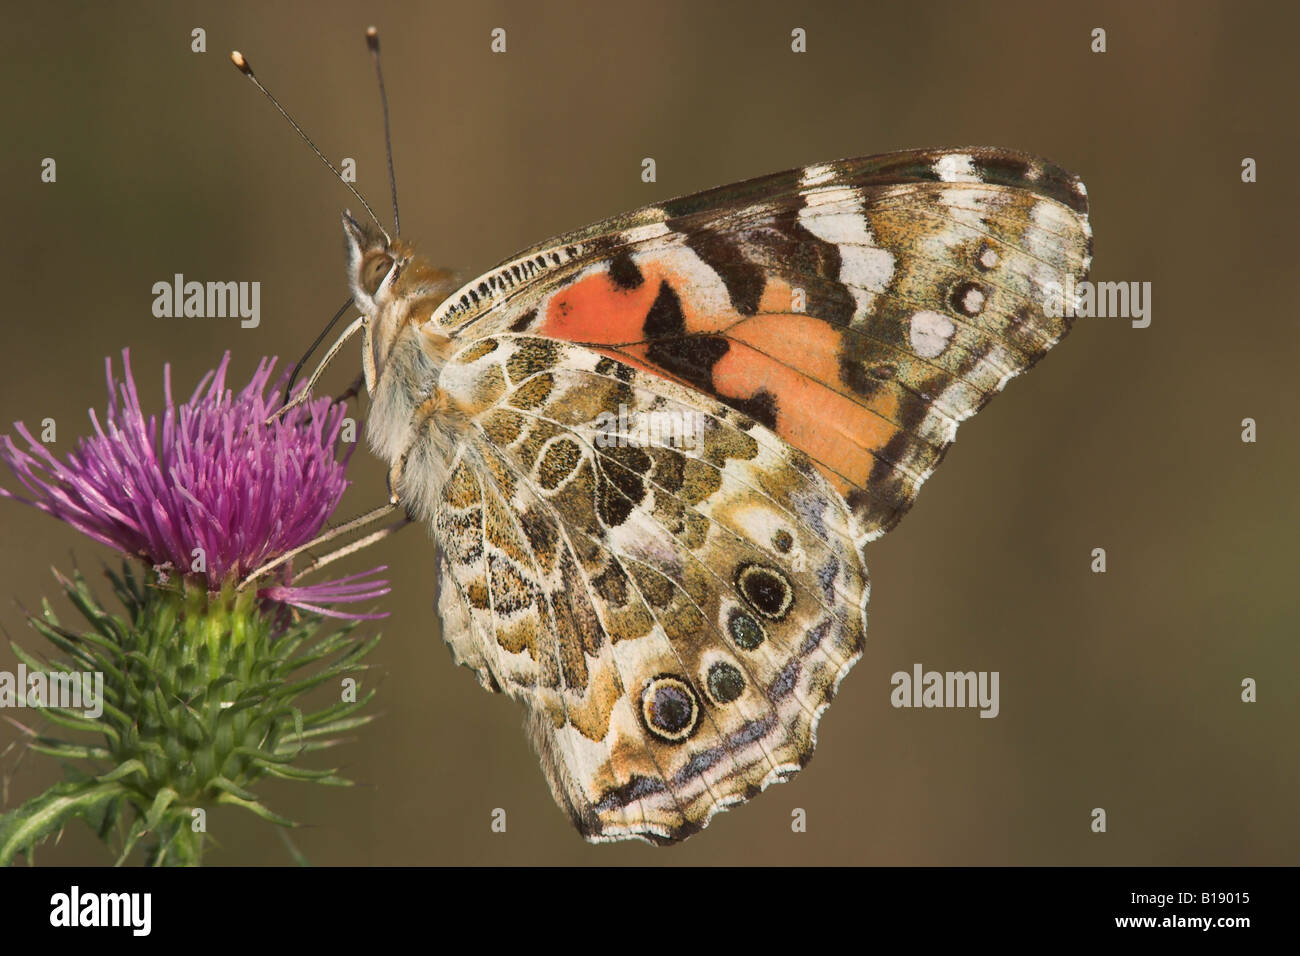 A Painted Lady butterfly (Vanessa cardui) in Etobicoke, Ontario, Canada. Stock Photo